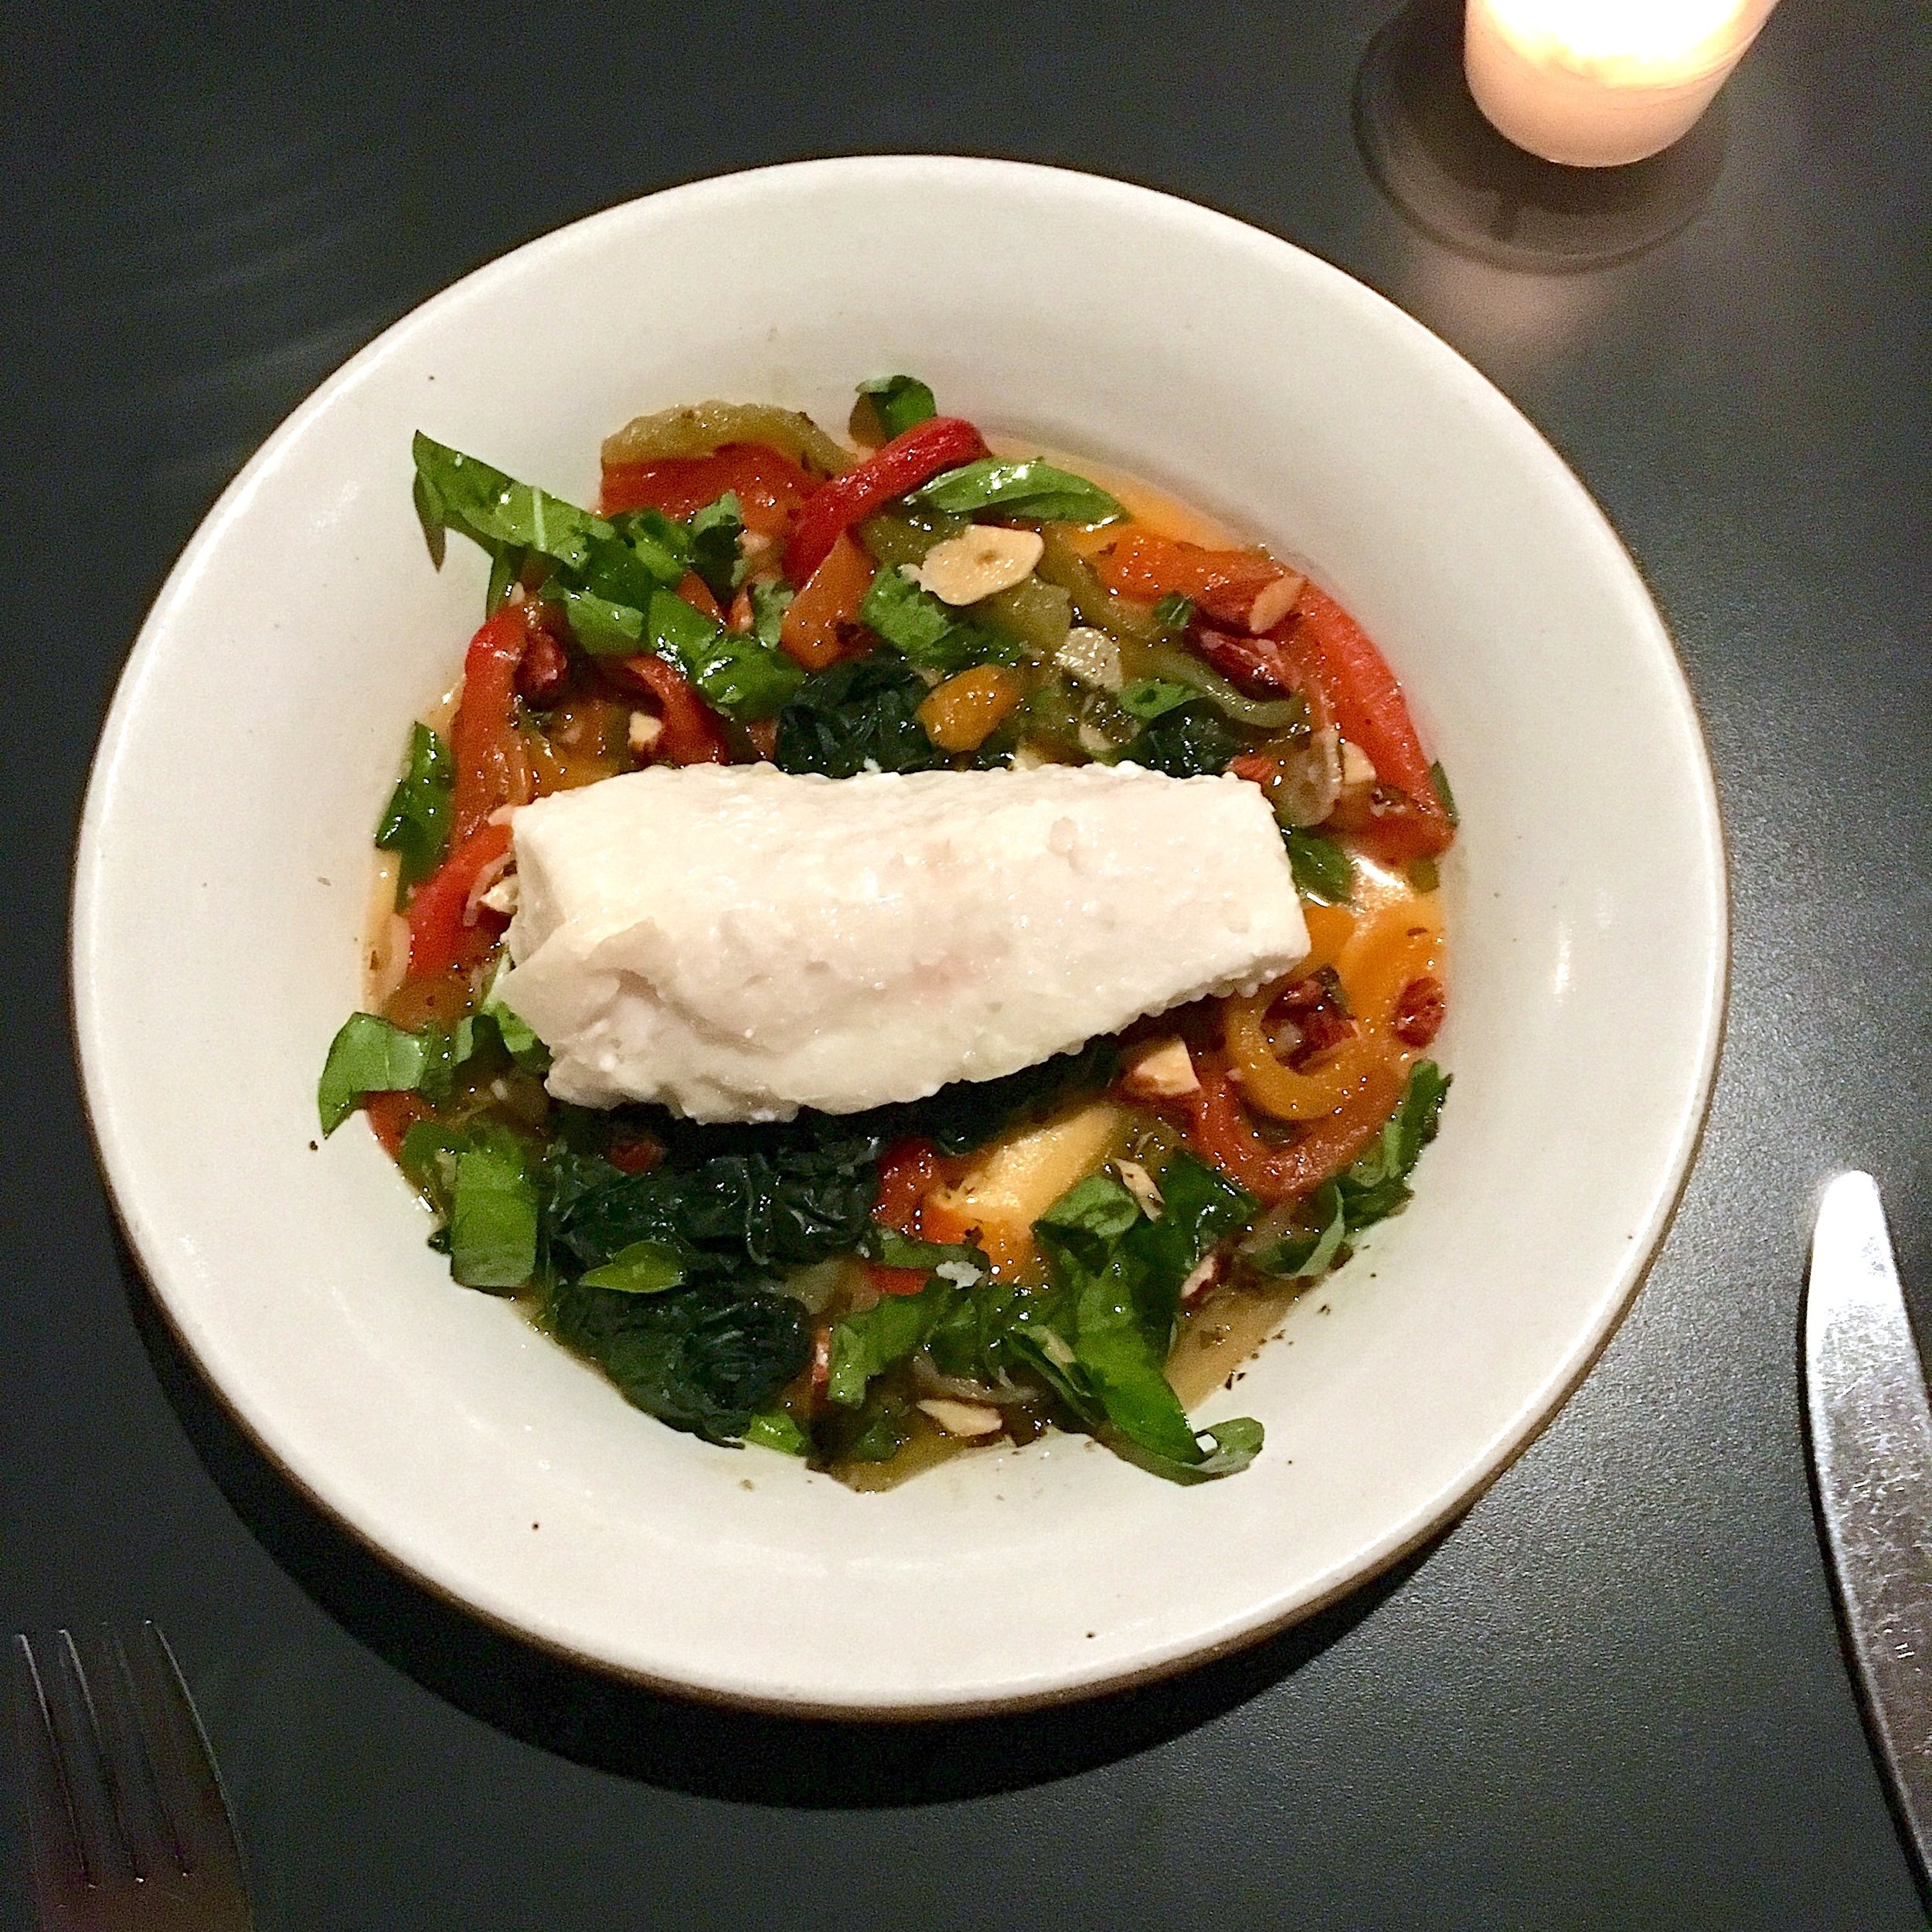 slow cooked halibut, roasted peppers, kale, almonds